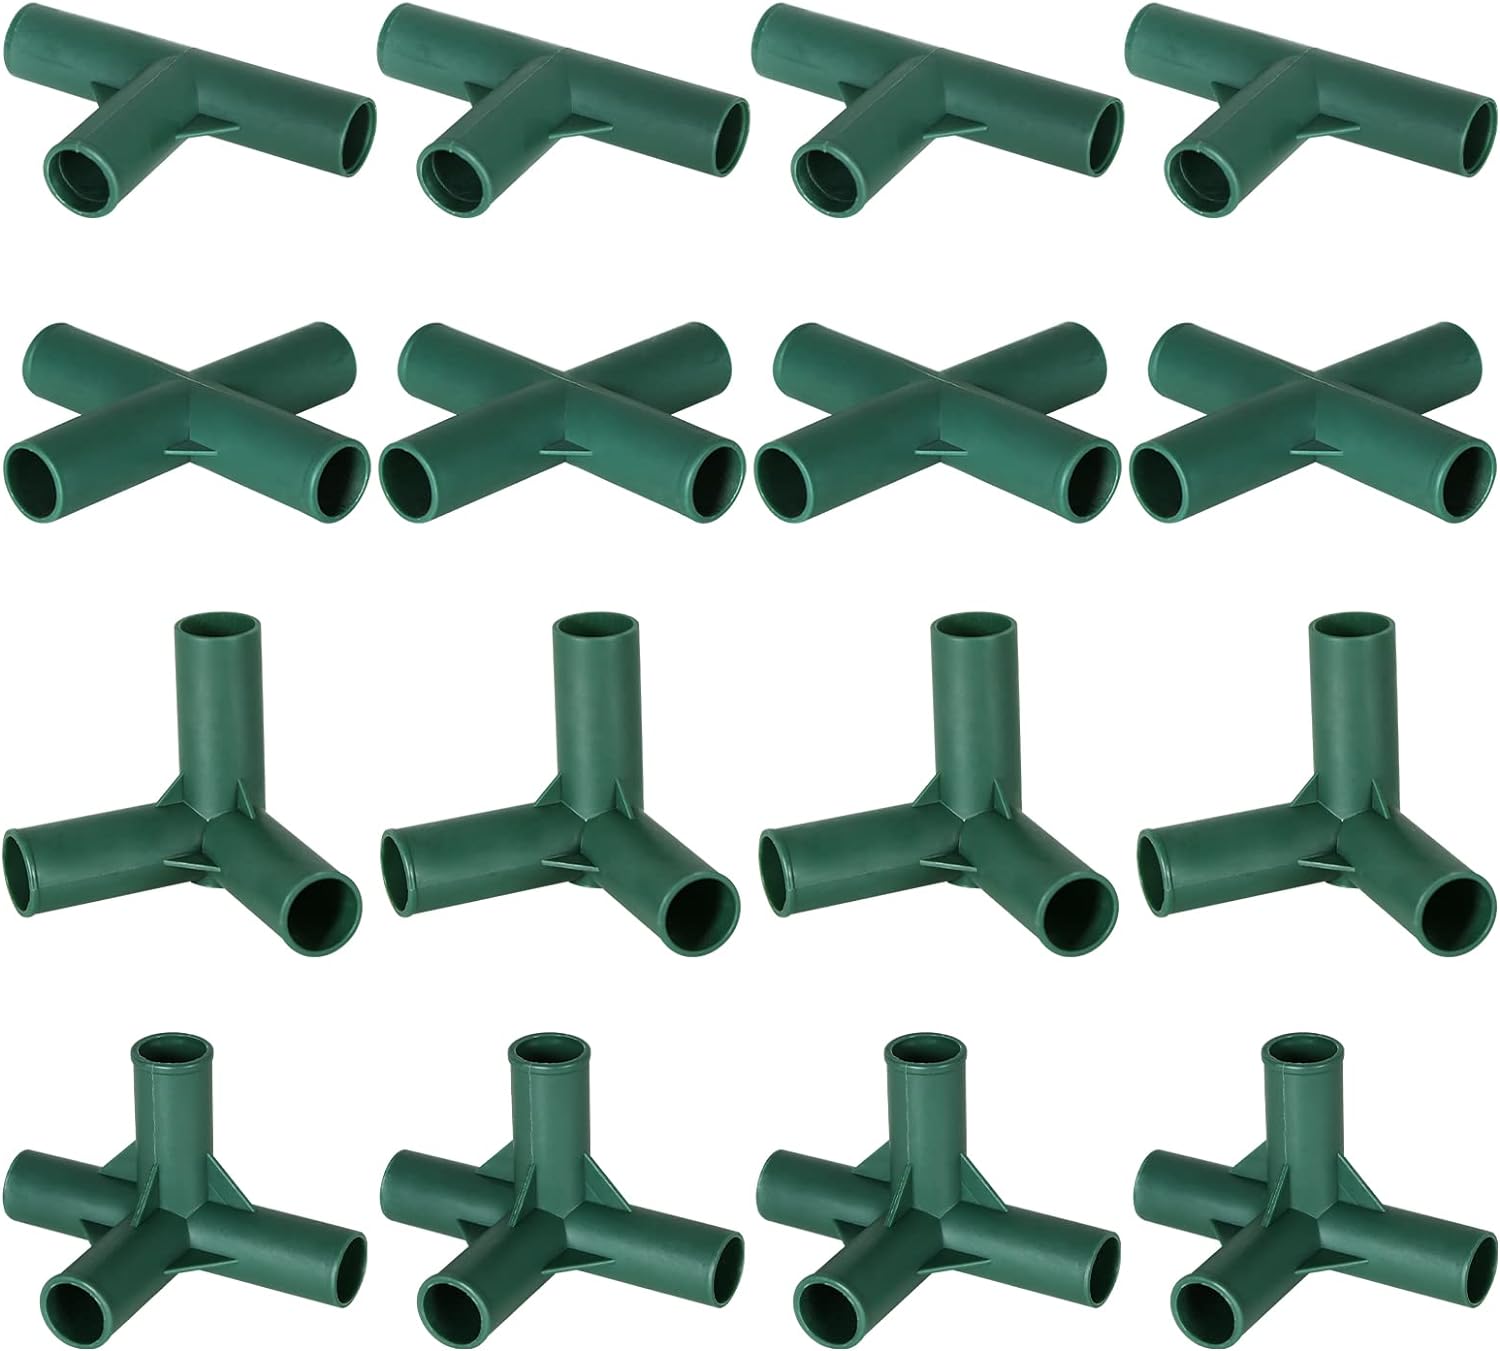 EAGLE PEAK Pack of 16pcs 4 Types Greenhouse Frame Connectors 0.63 in